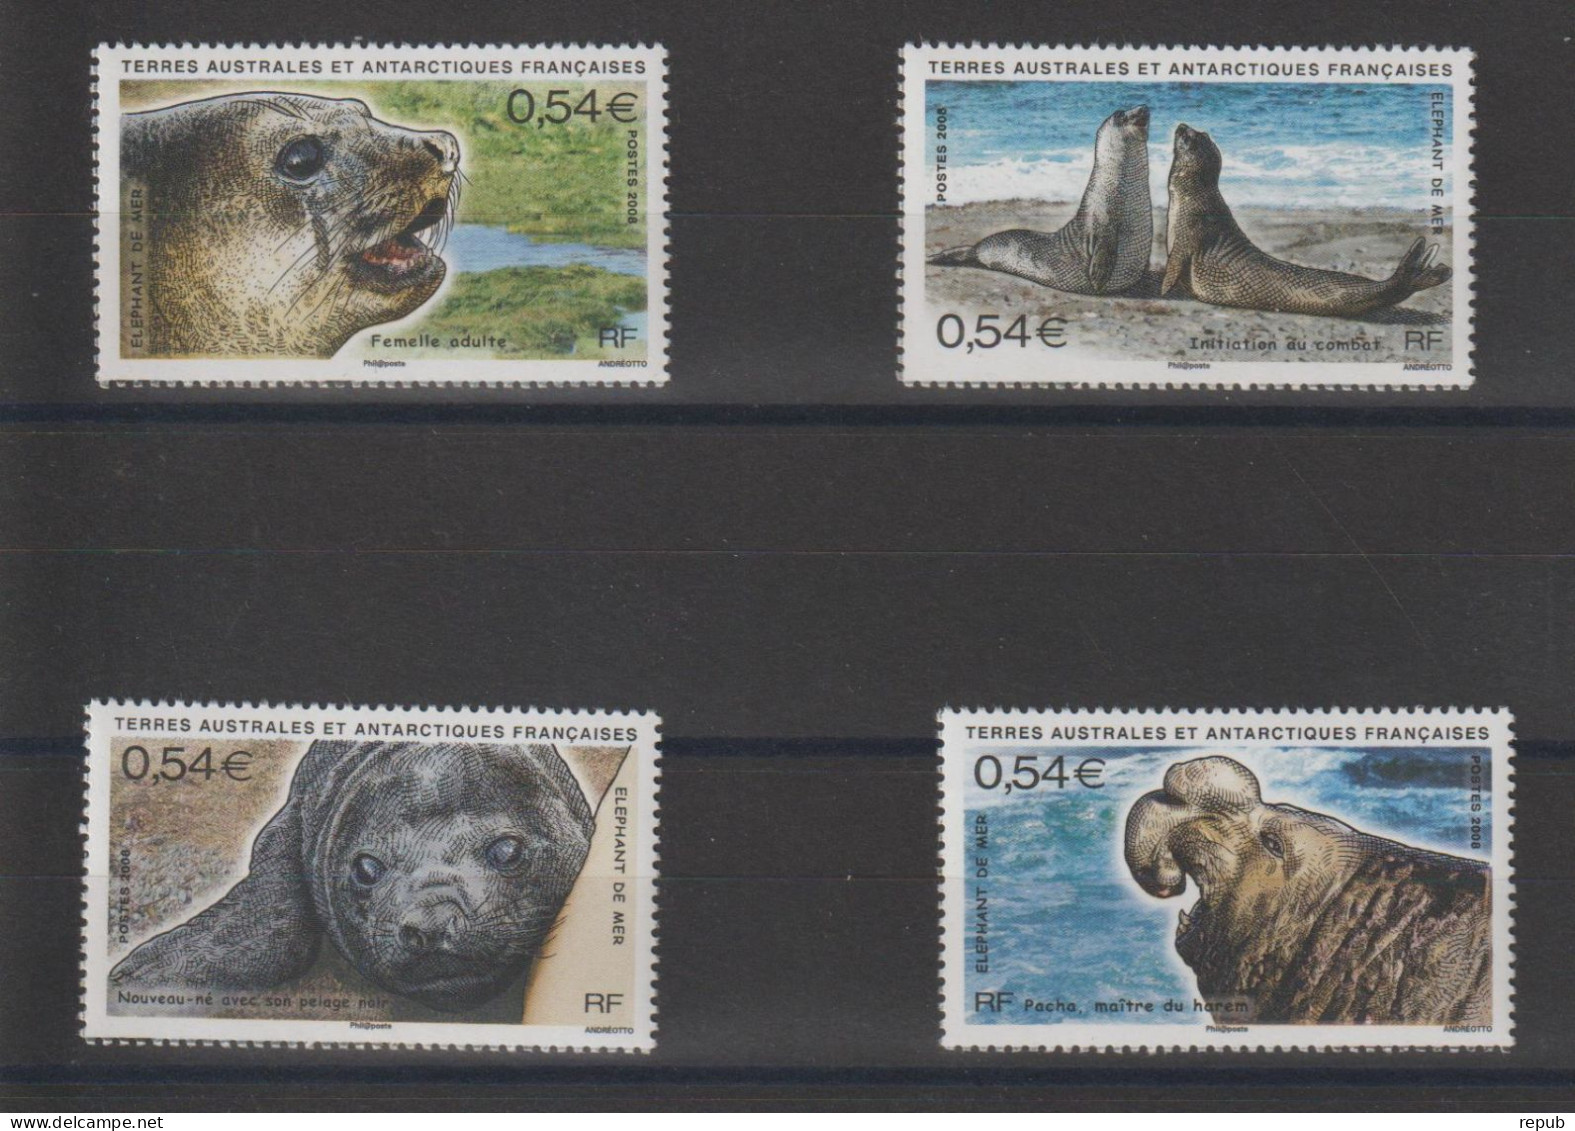 TAAF 2008 Timbres Issus Du BF 19, 508-511, 4 Val ** MNH - Nuovi